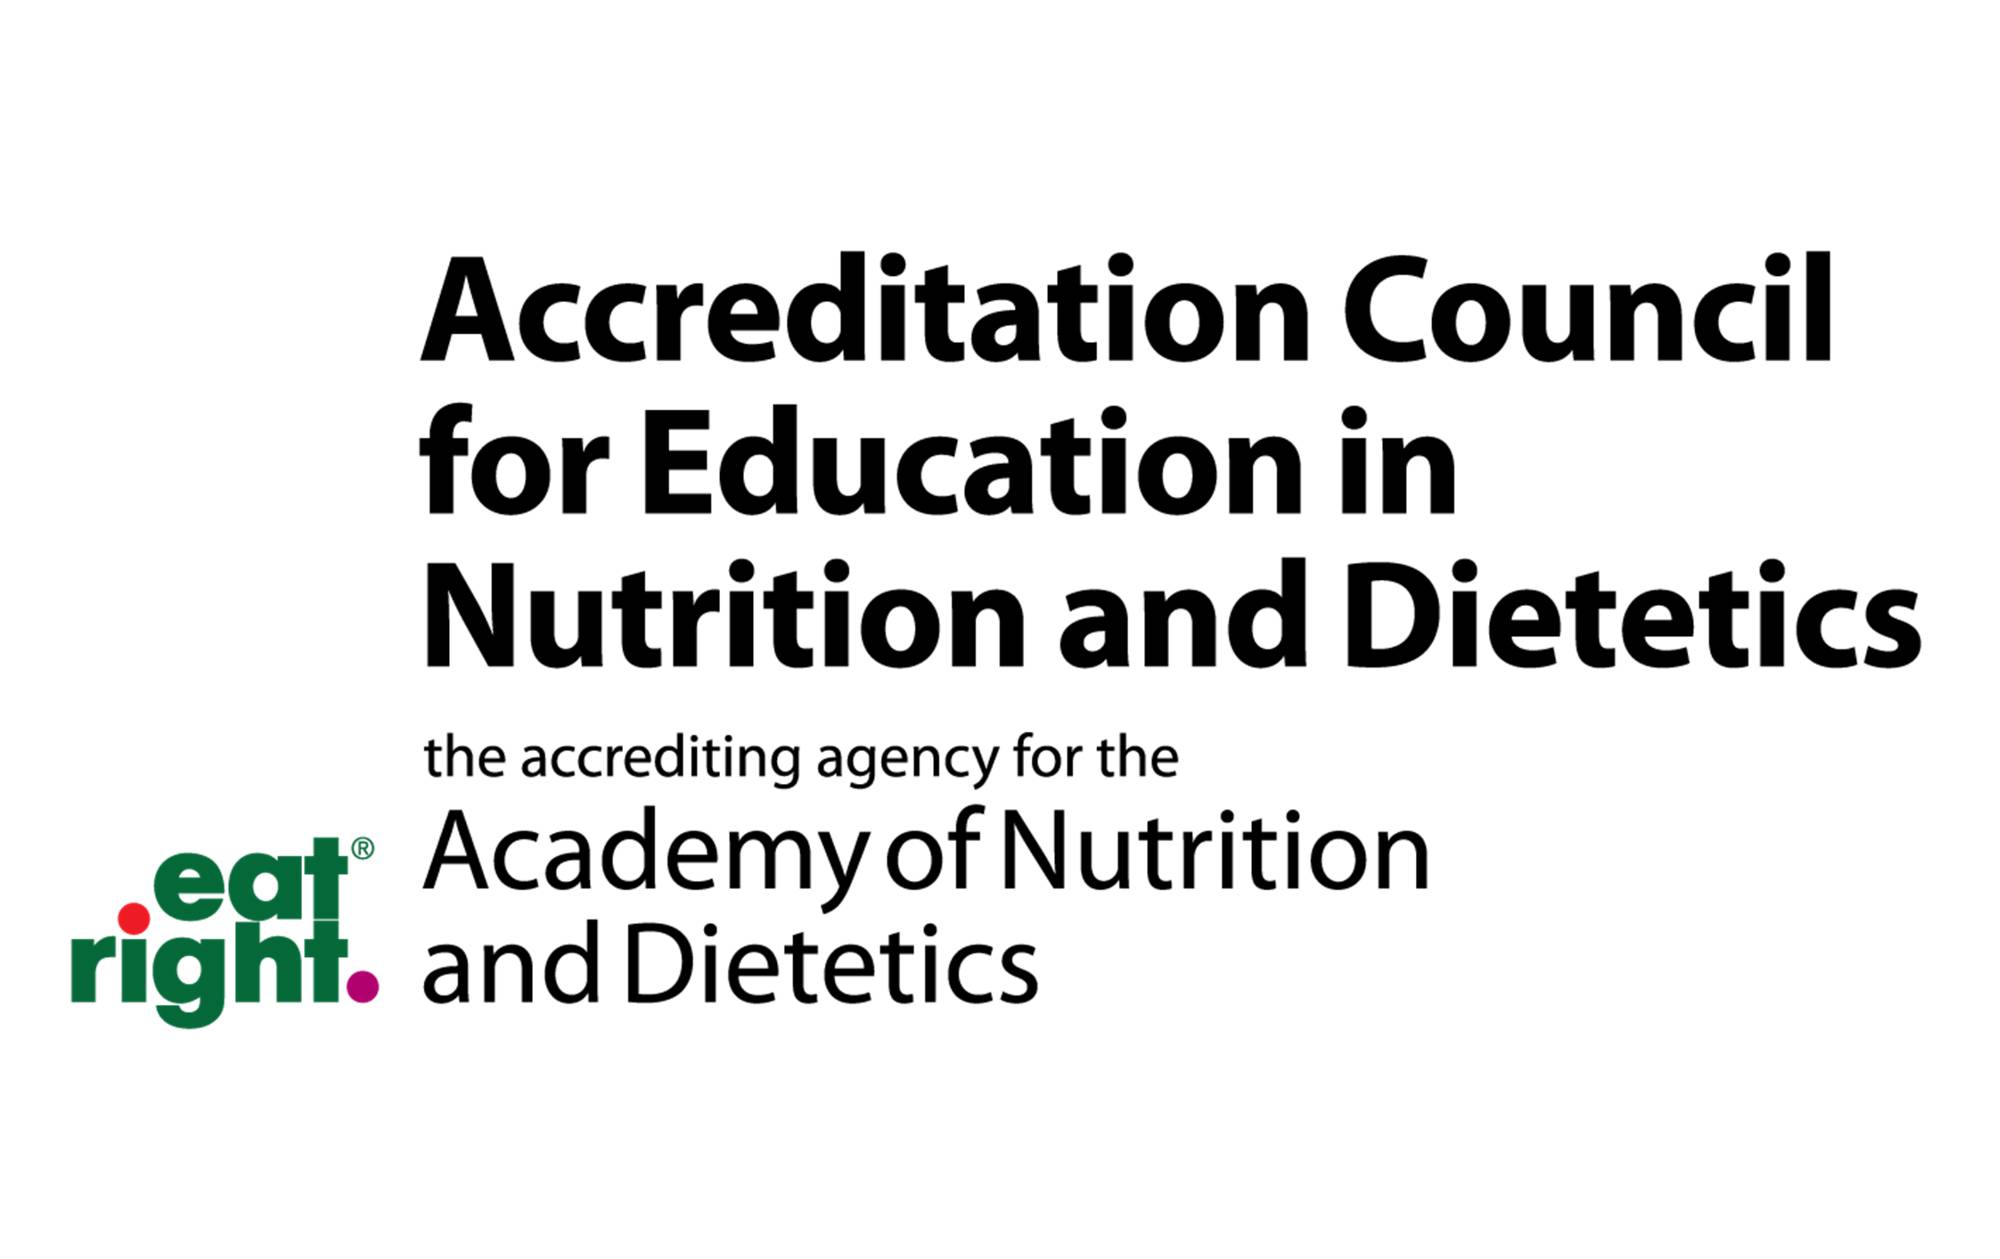 Logo for the Accreditation Council for Education in Nutrition and Dietetics, the accrediting agency for the Academy of Nutrition and Dietetics